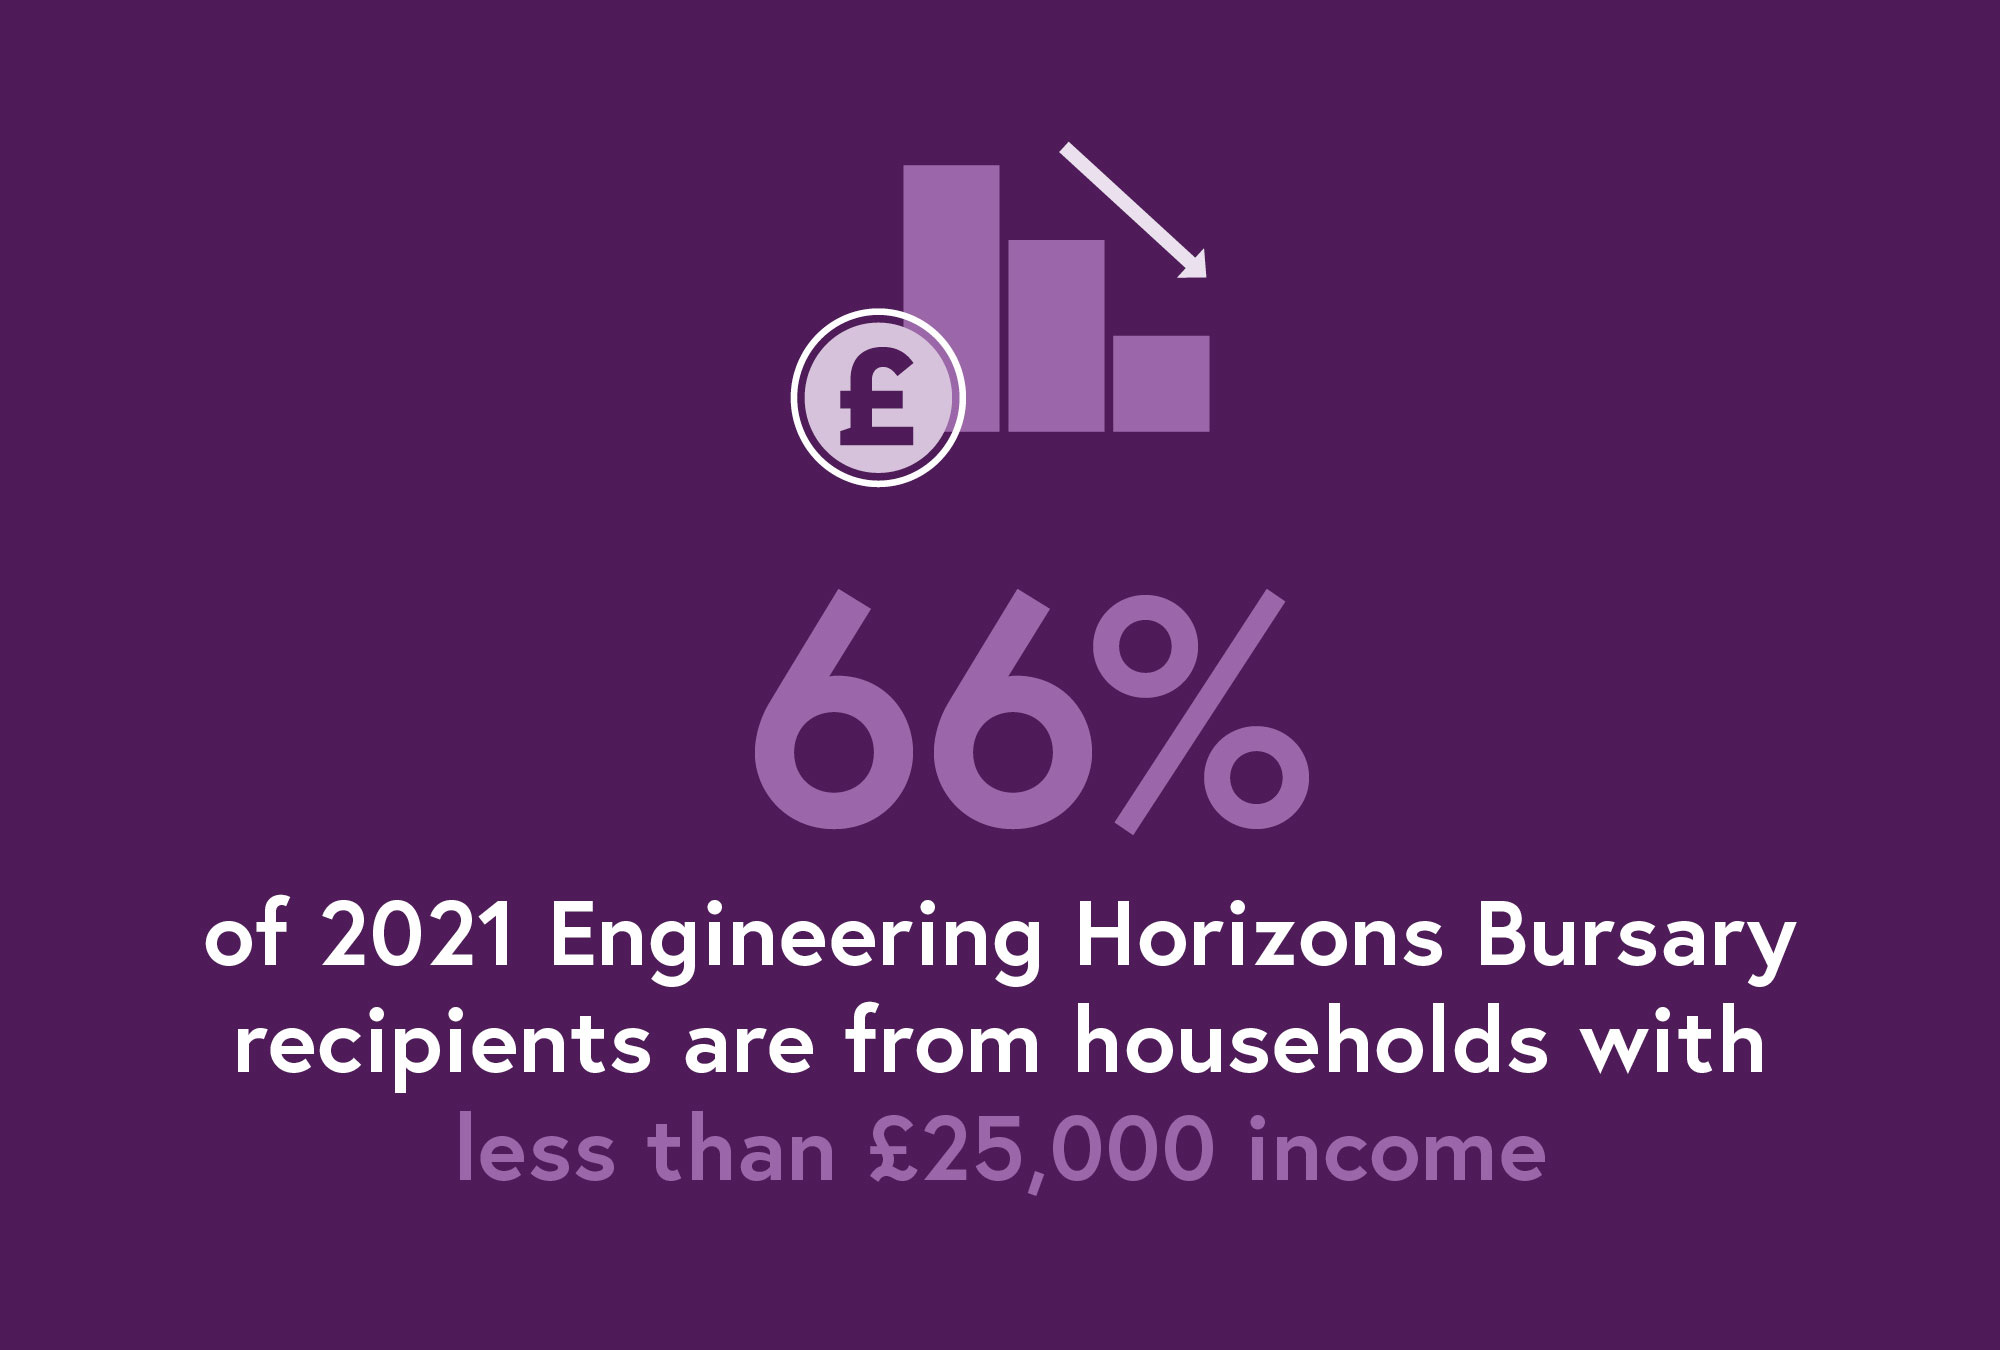 Infographic - 66% of 2021 Engineering Horizons Bursary recipients are from households with less than £25,000 income